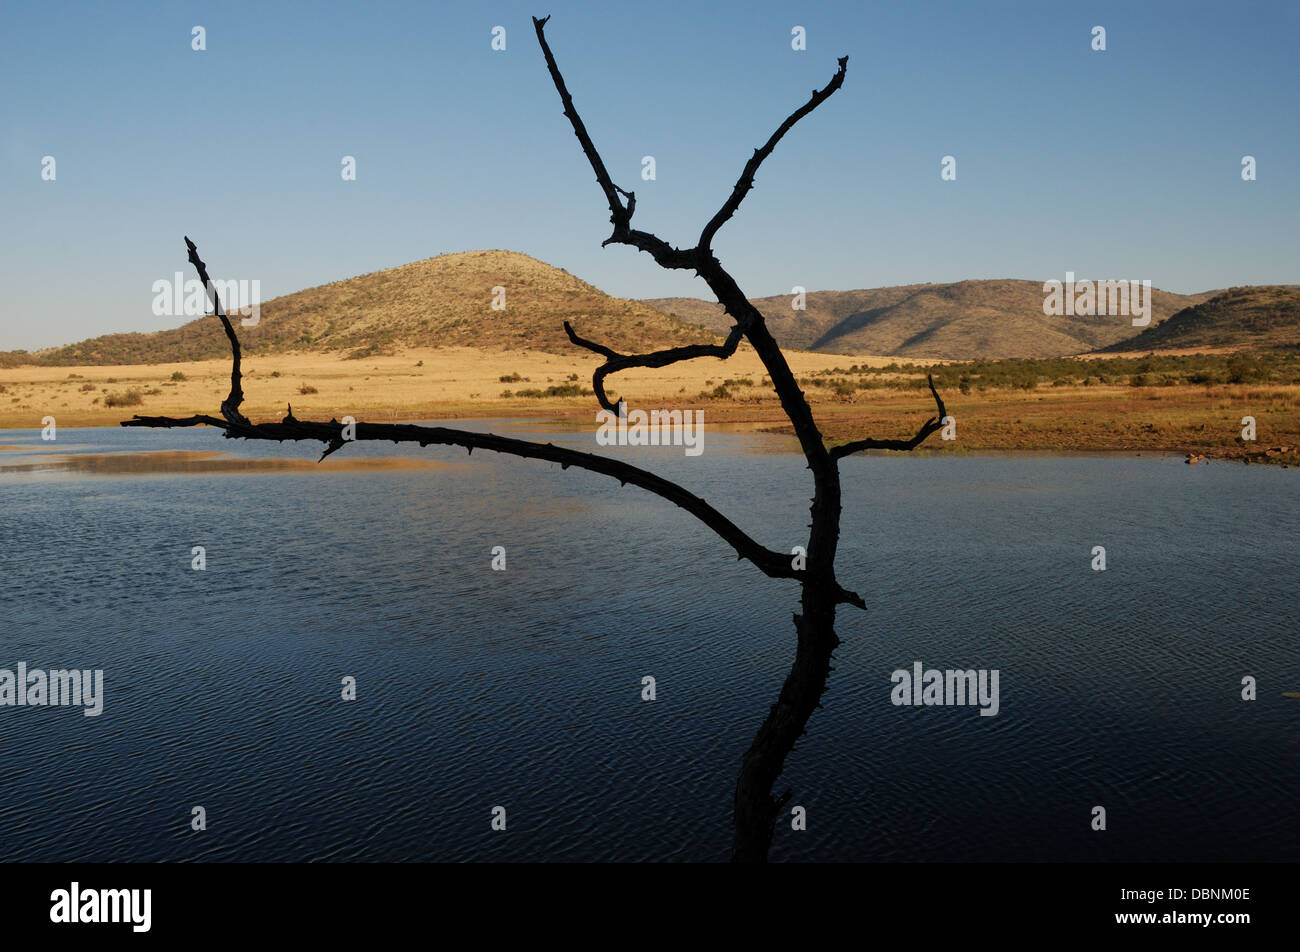 Dead tree overlooking lake at Pilanesberg Game Reserve, South Africa. Stock Photo